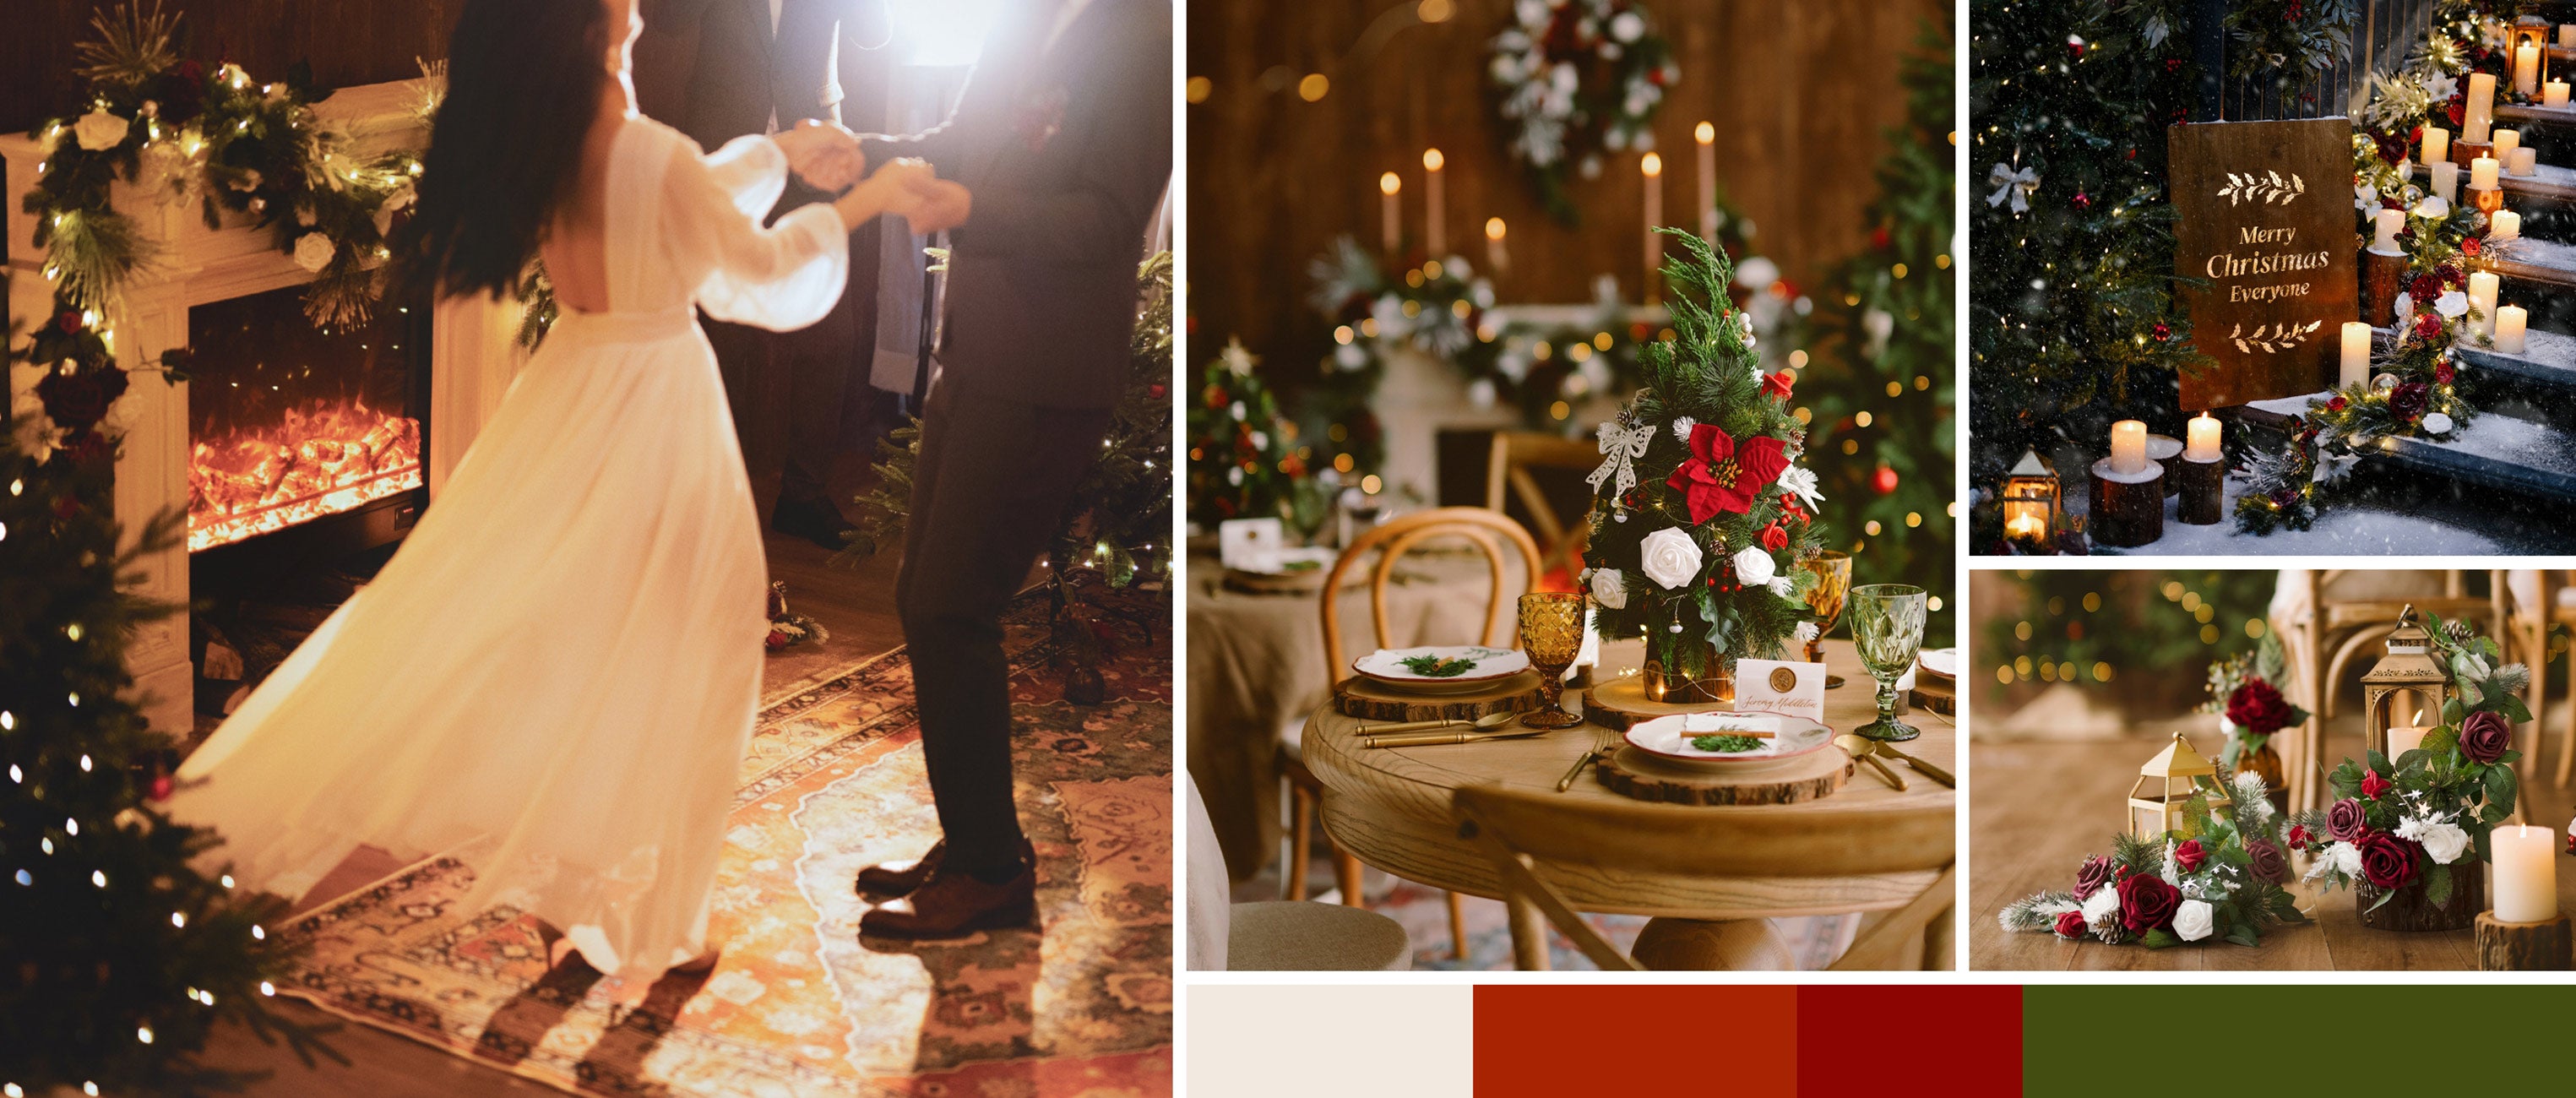 Christmas Red & Sparkle Wedding pc banner